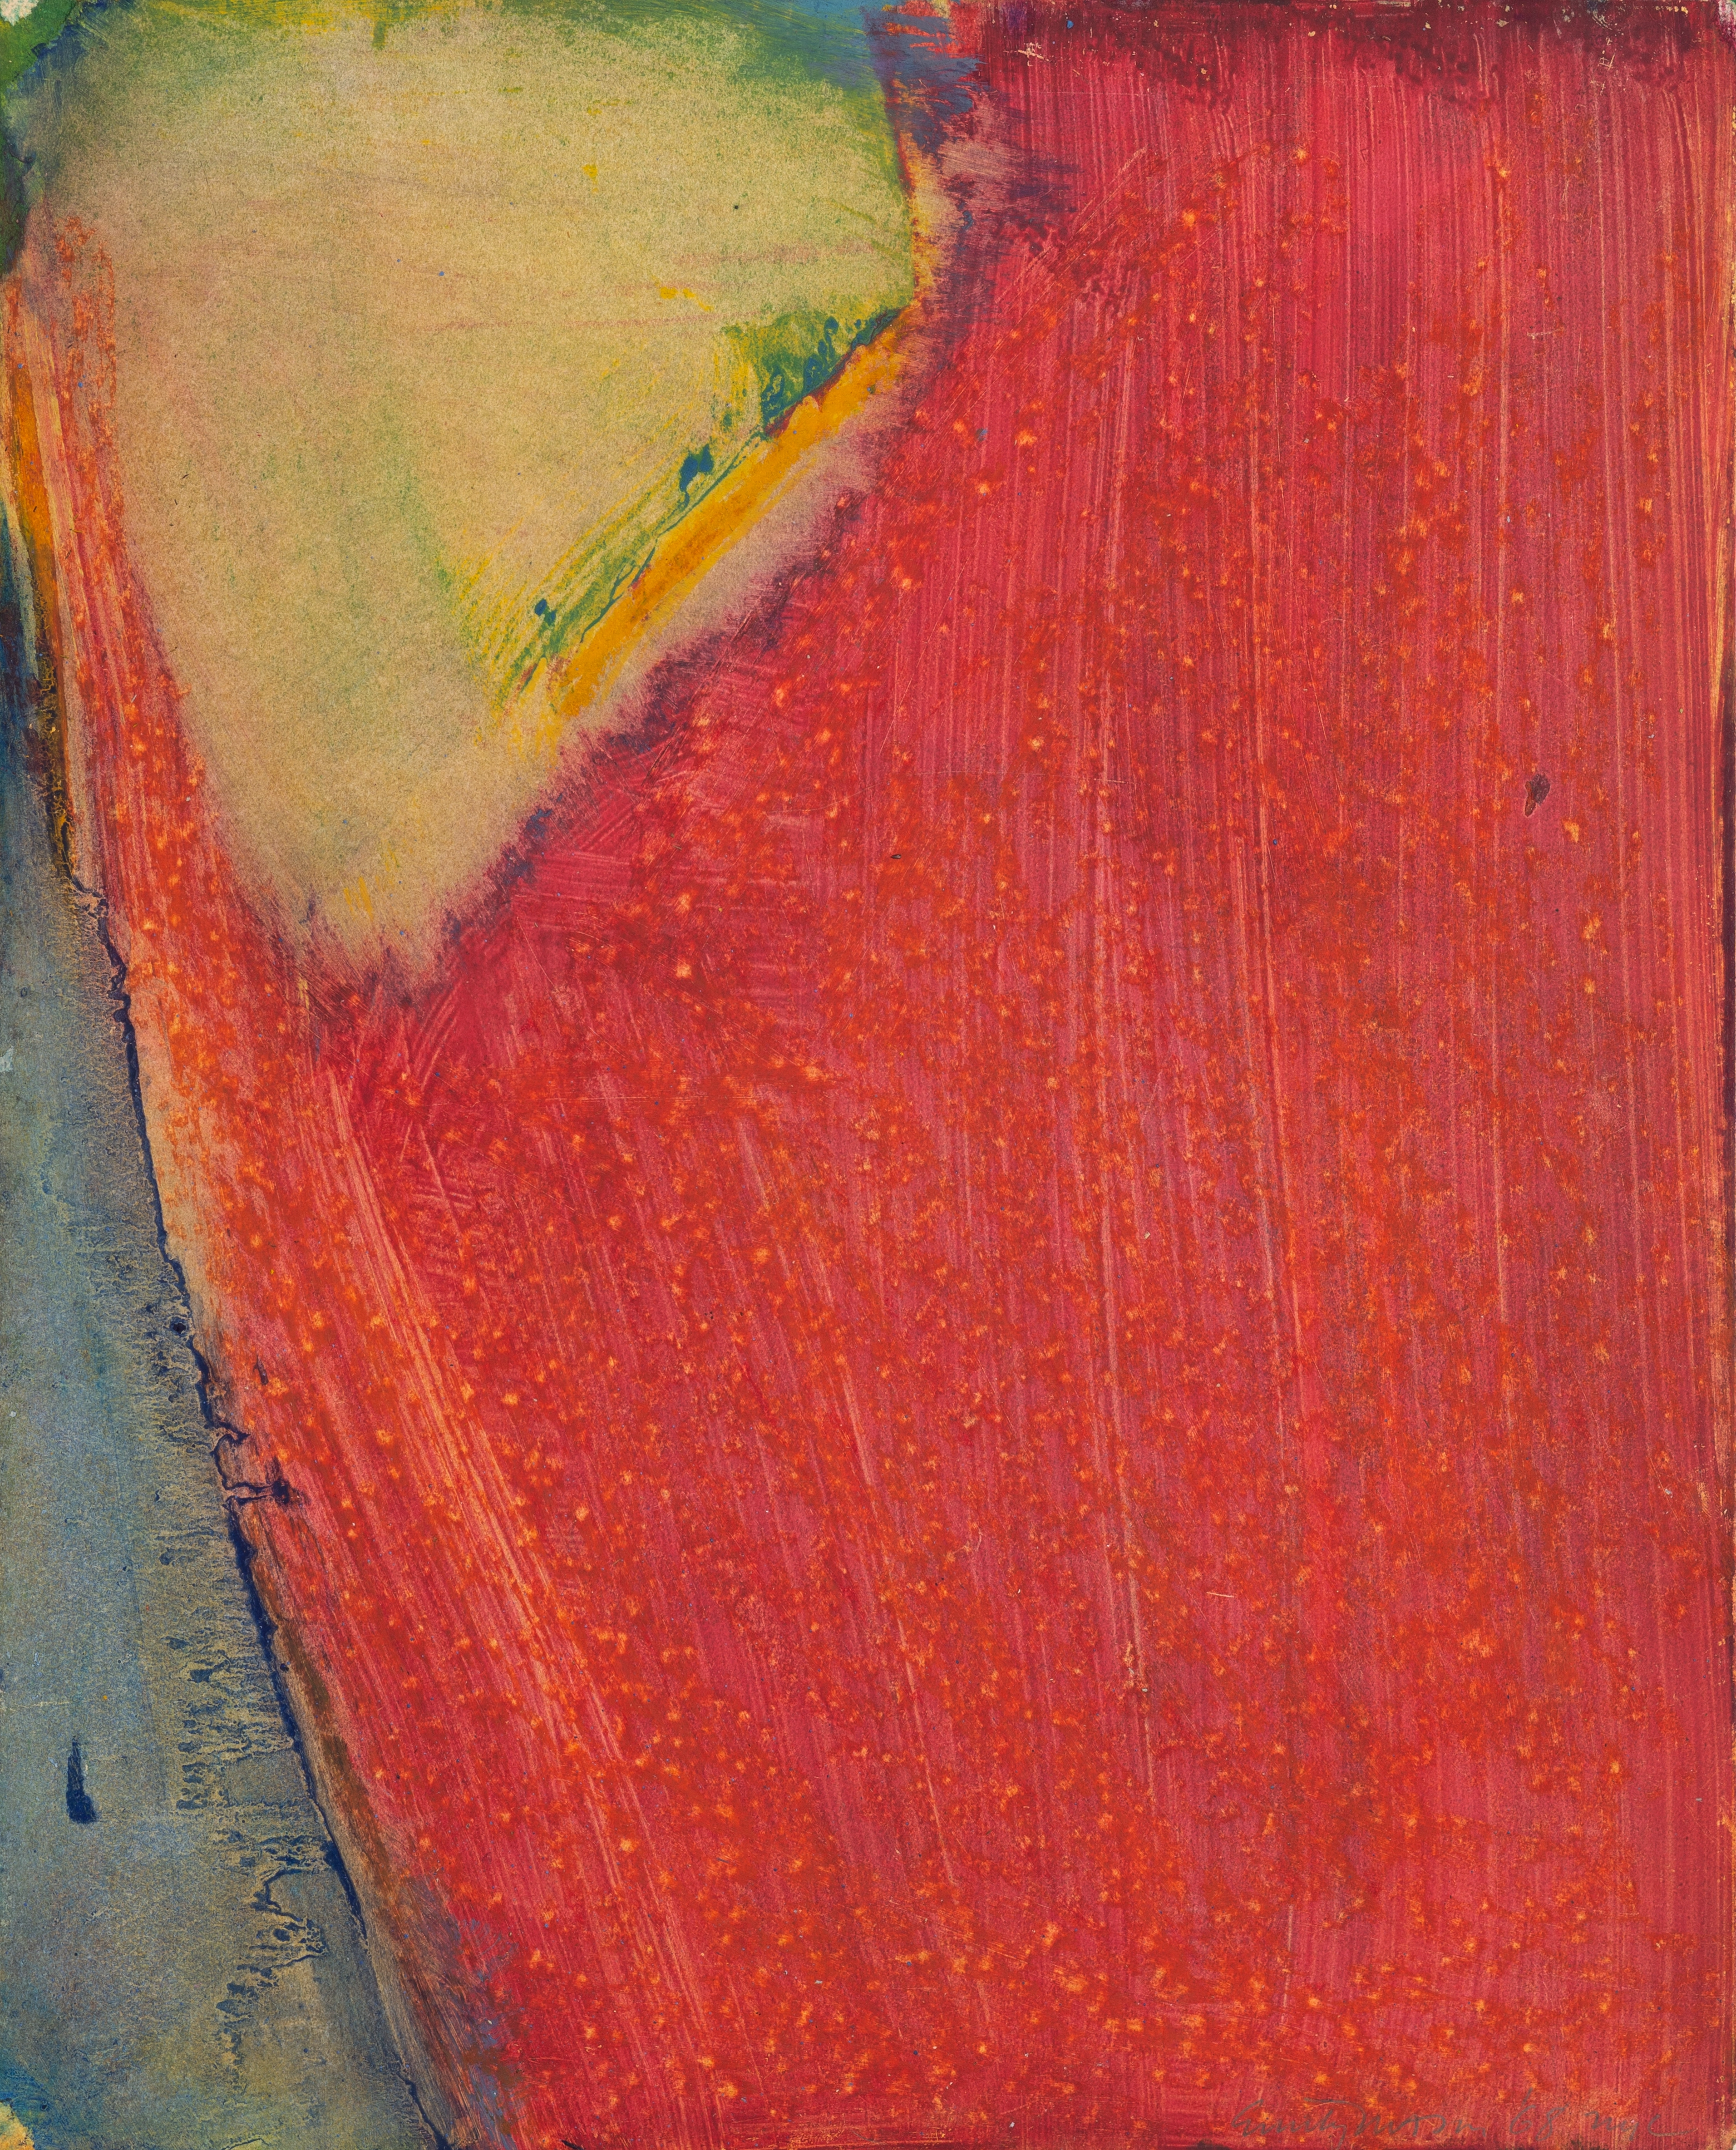 Abstract oil on paper work; a large swathe of red is most of the composition, with a blue wash of color in the bottom left and a light green form on the top left.